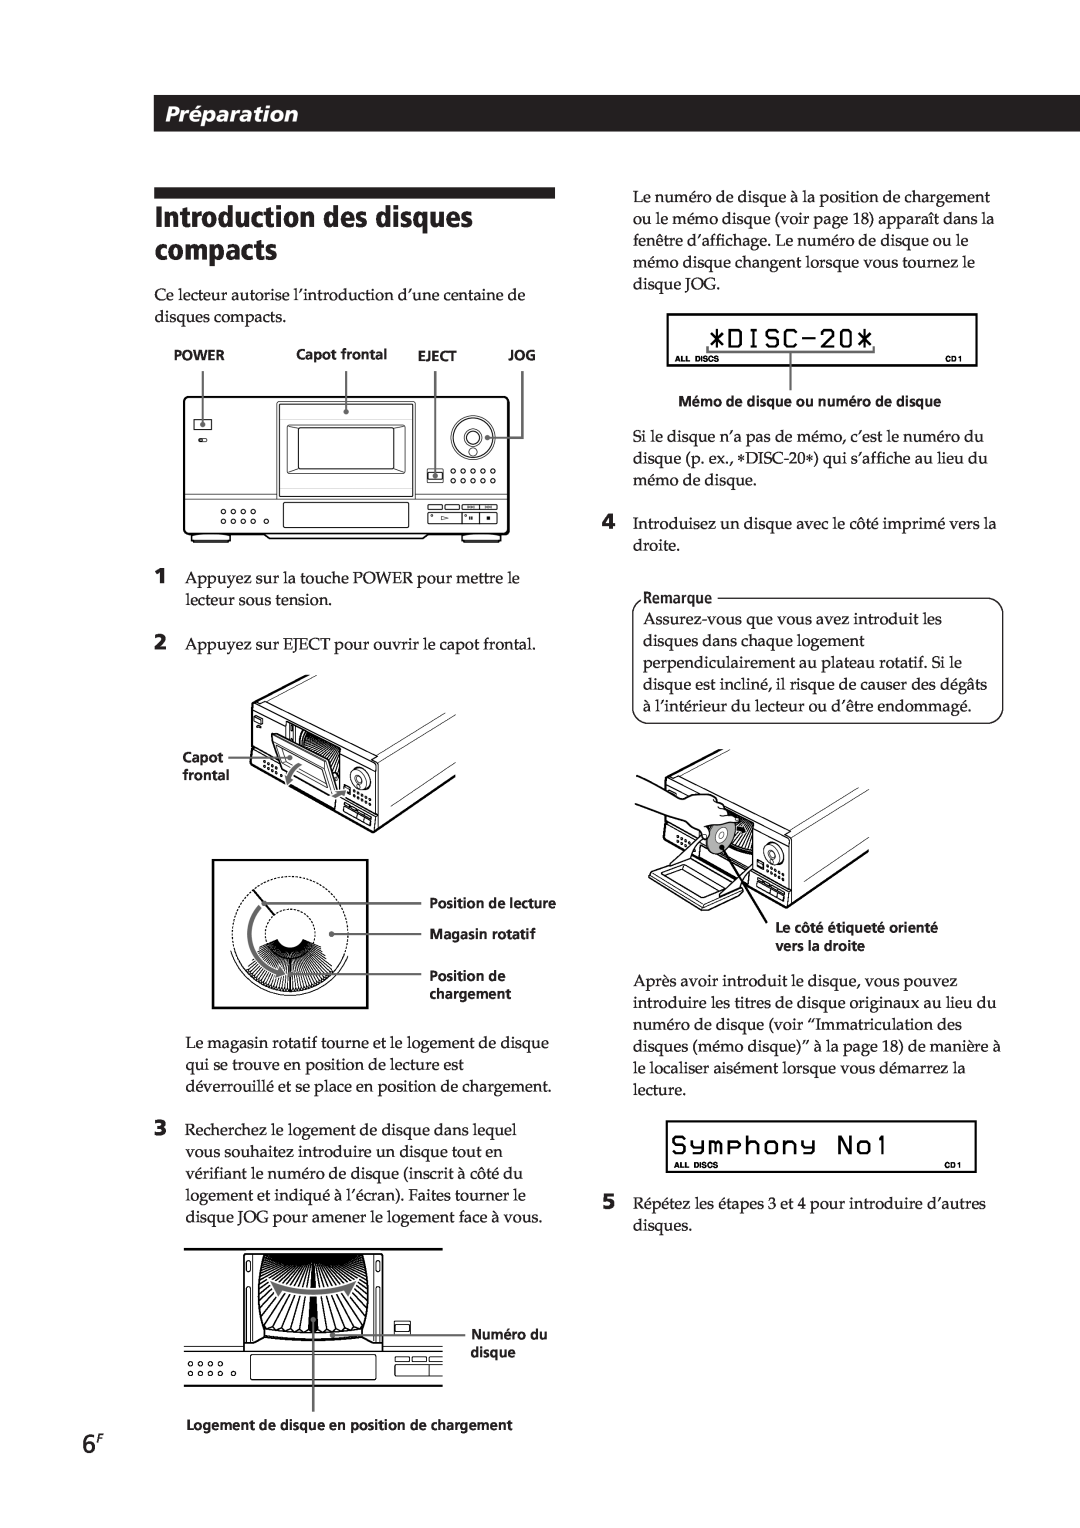 Sony CDP-CX153 manual Introduction des disques compacts, D I S C, S y m p h o n y N o, Préparation, Remarque 